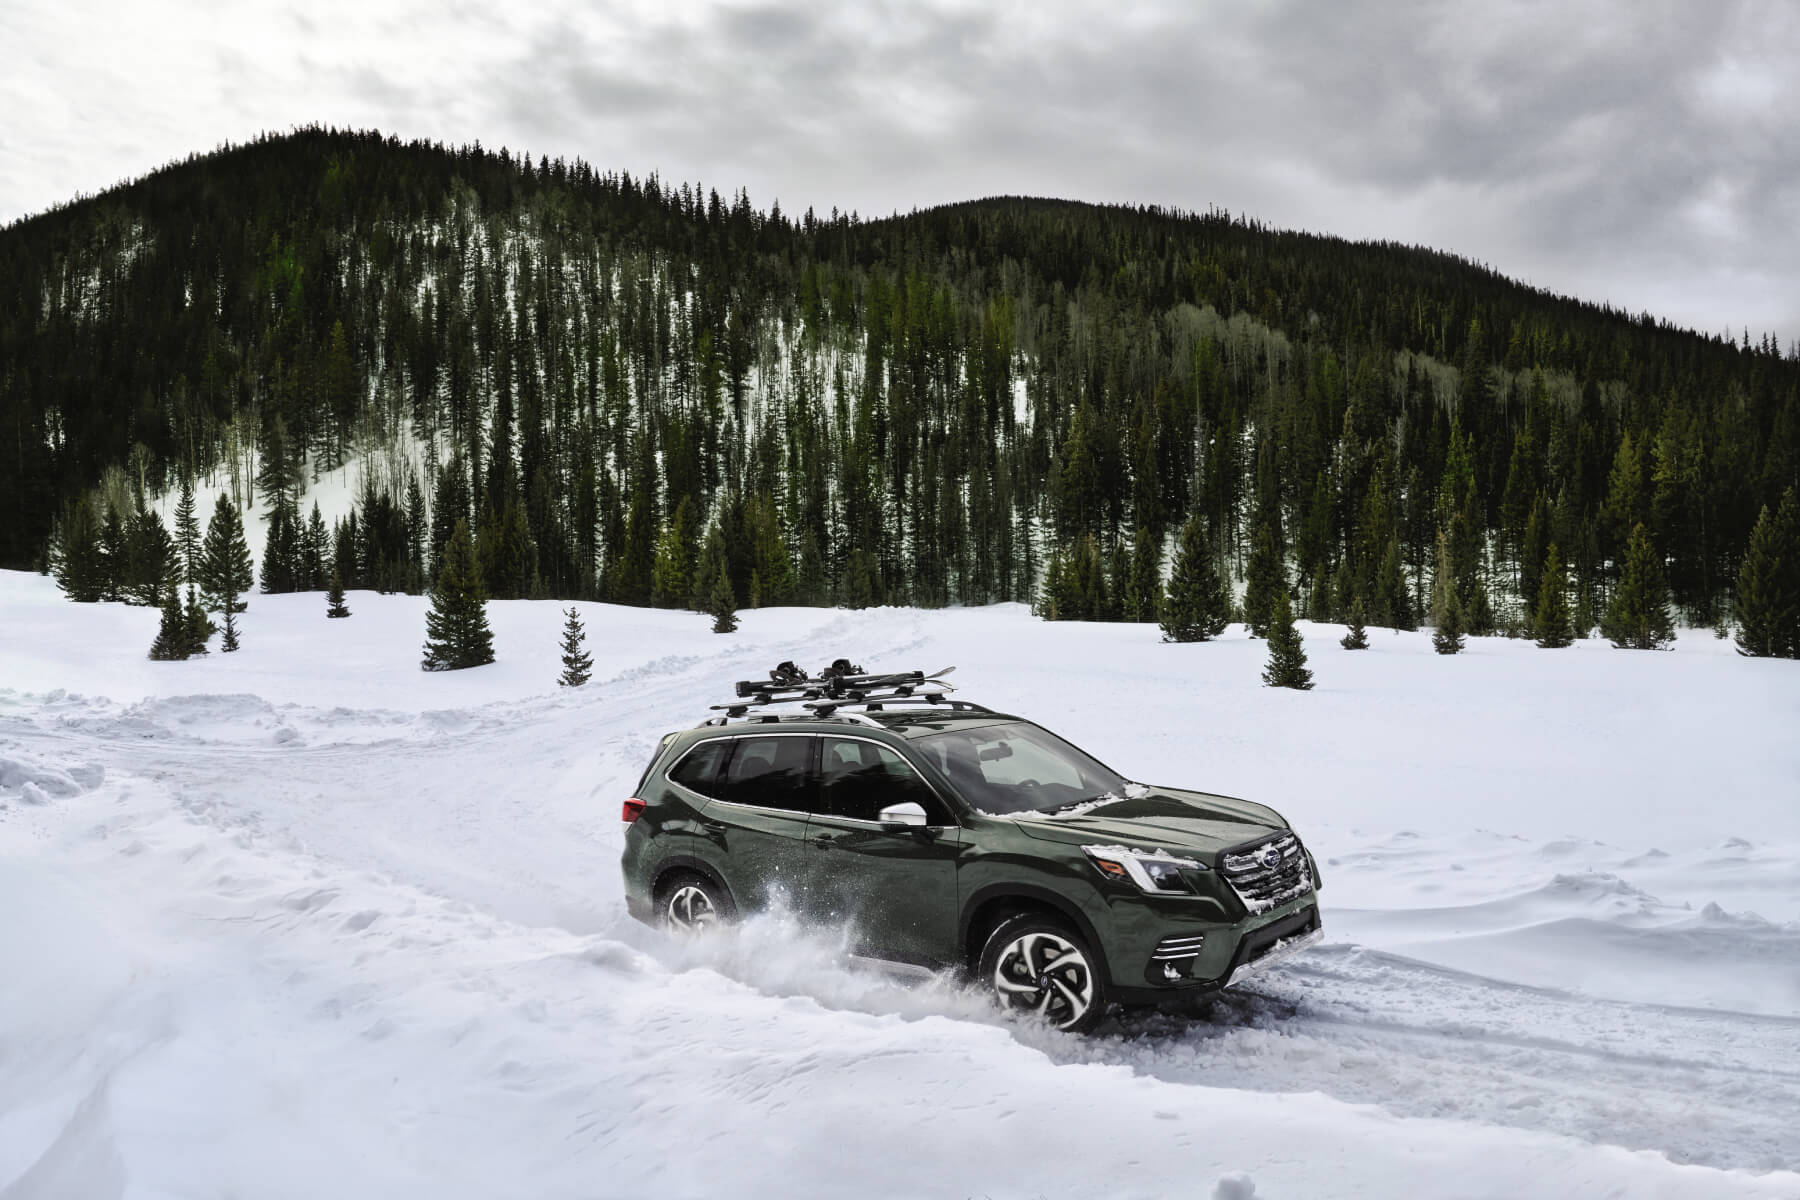 The 2023 Subaru Forester in green showing off its winter weather strengths.